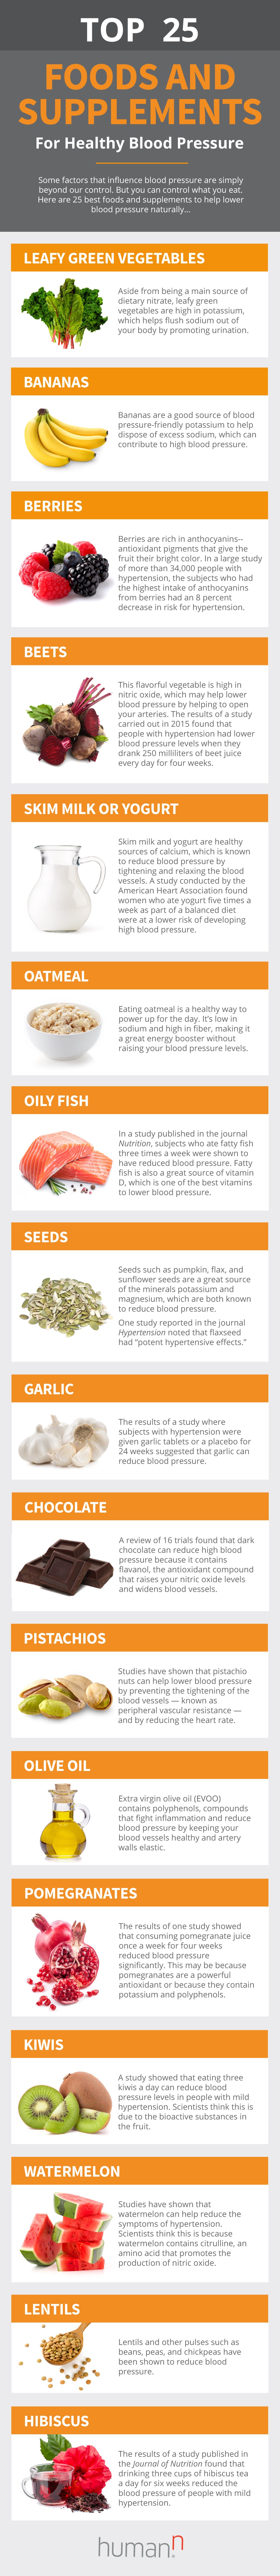 Top 25 Foods and Supplements for healthy blood pressure infographic